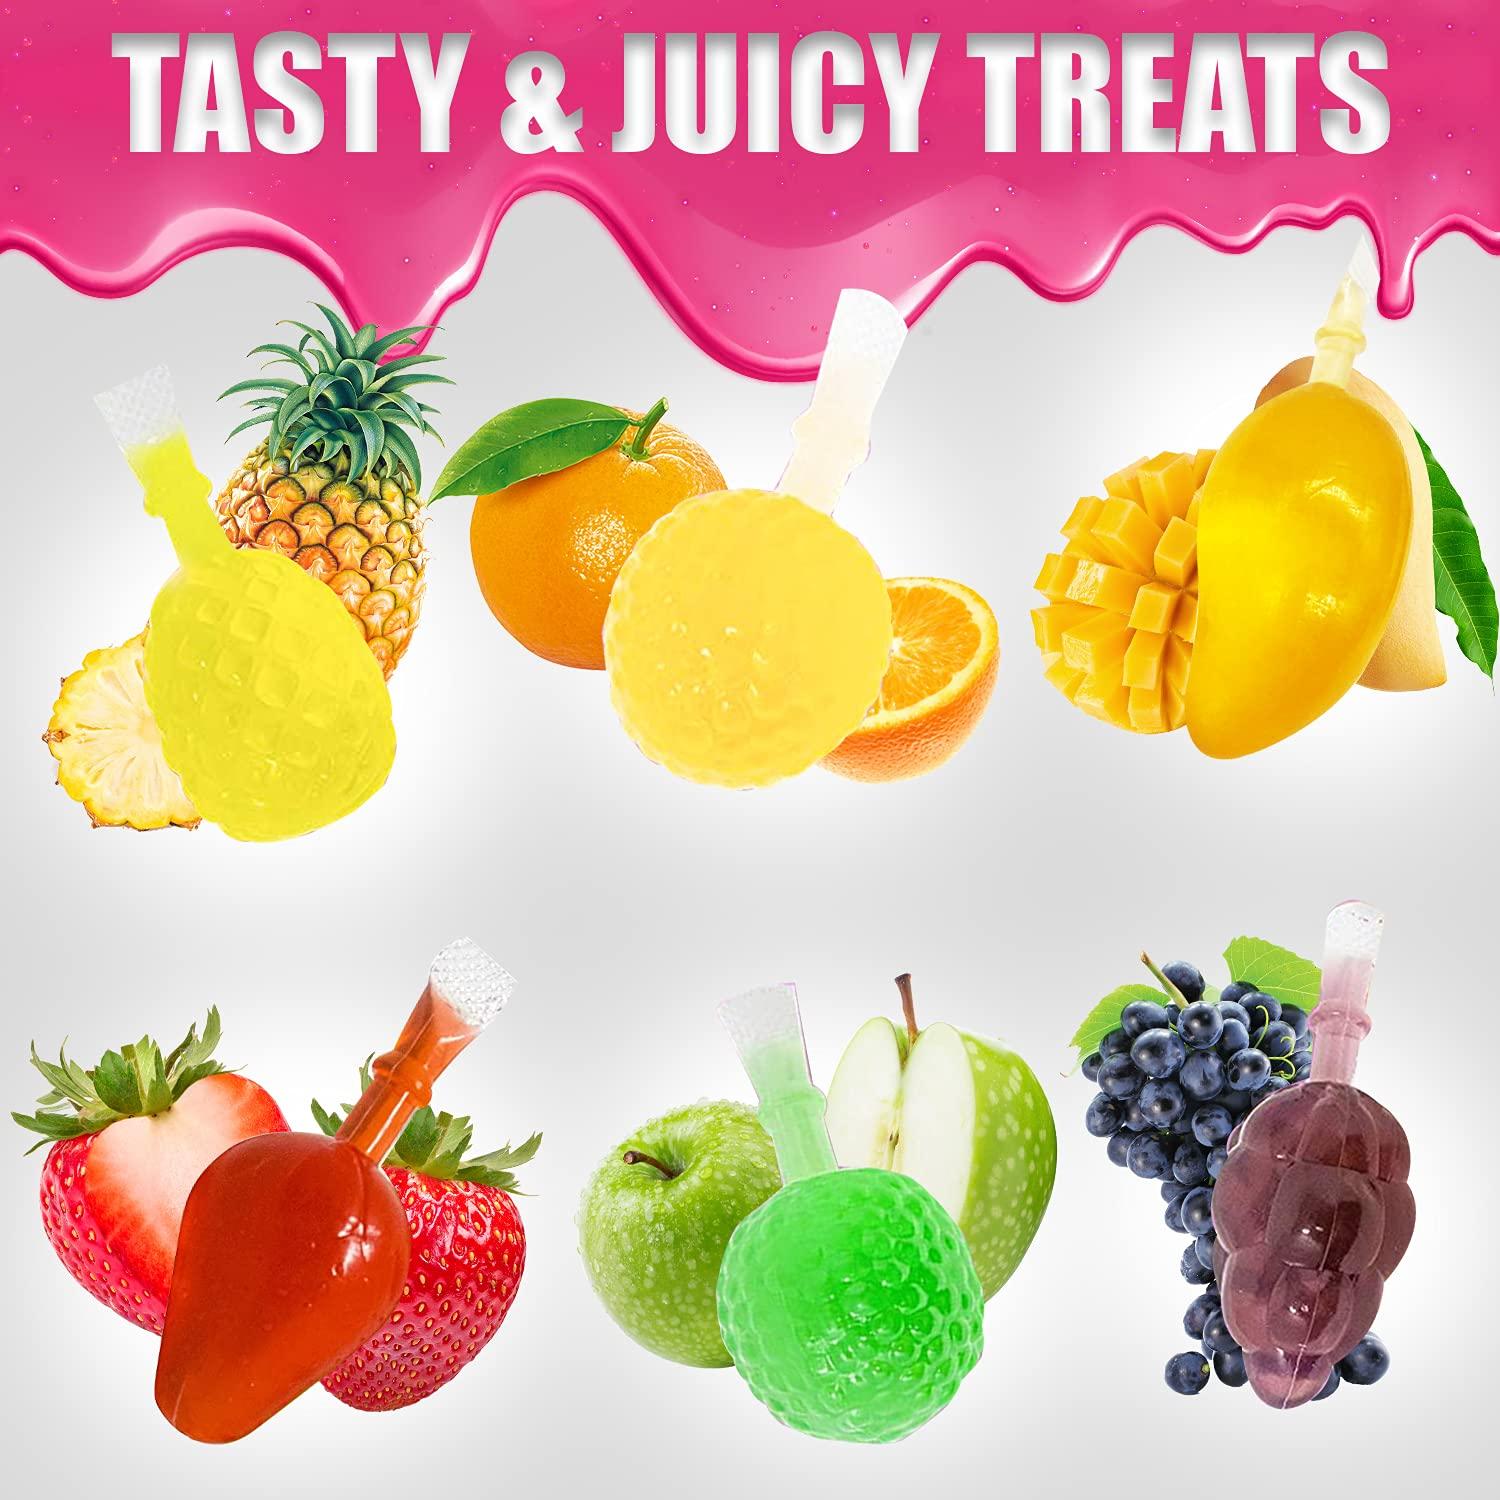 Fusion Select Jelly Fruit Snack Tik Tok Challenge Hit or Miss - Fruit-Shaped  Jelly- Assorted Flavors Strawberry Orange Apple Pineapple Grape Mango (Jar)